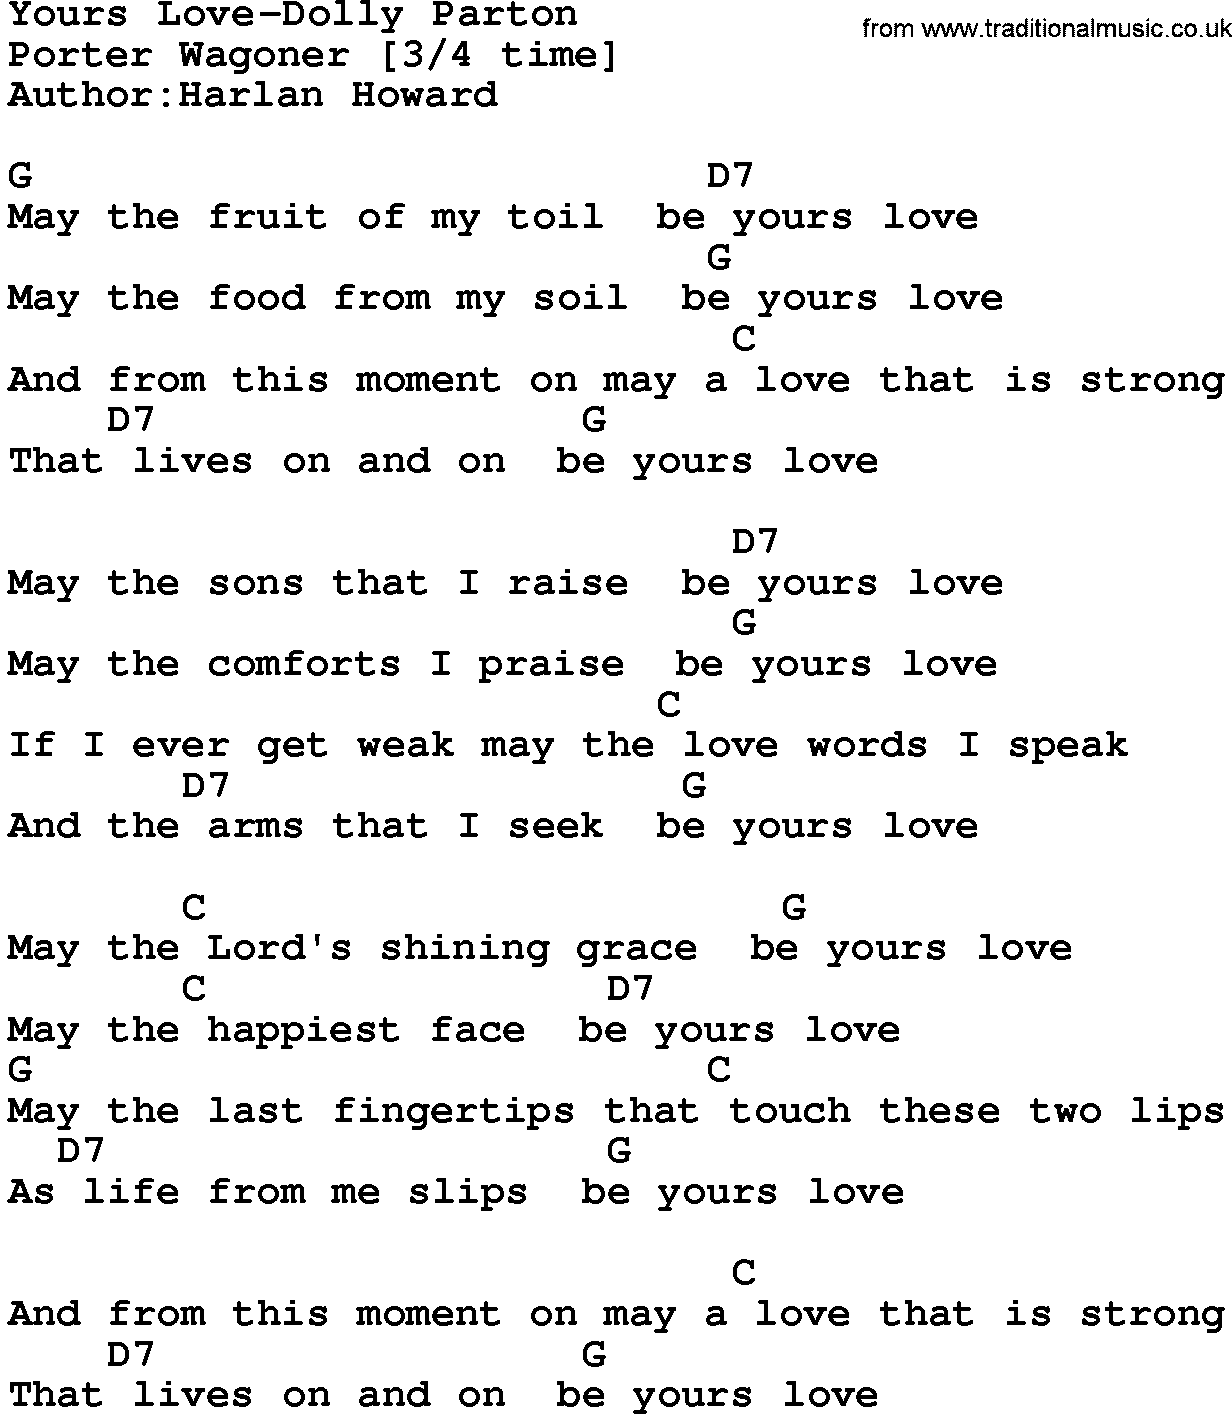 Country music song: Yours Love-Dolly Parton lyrics and chords